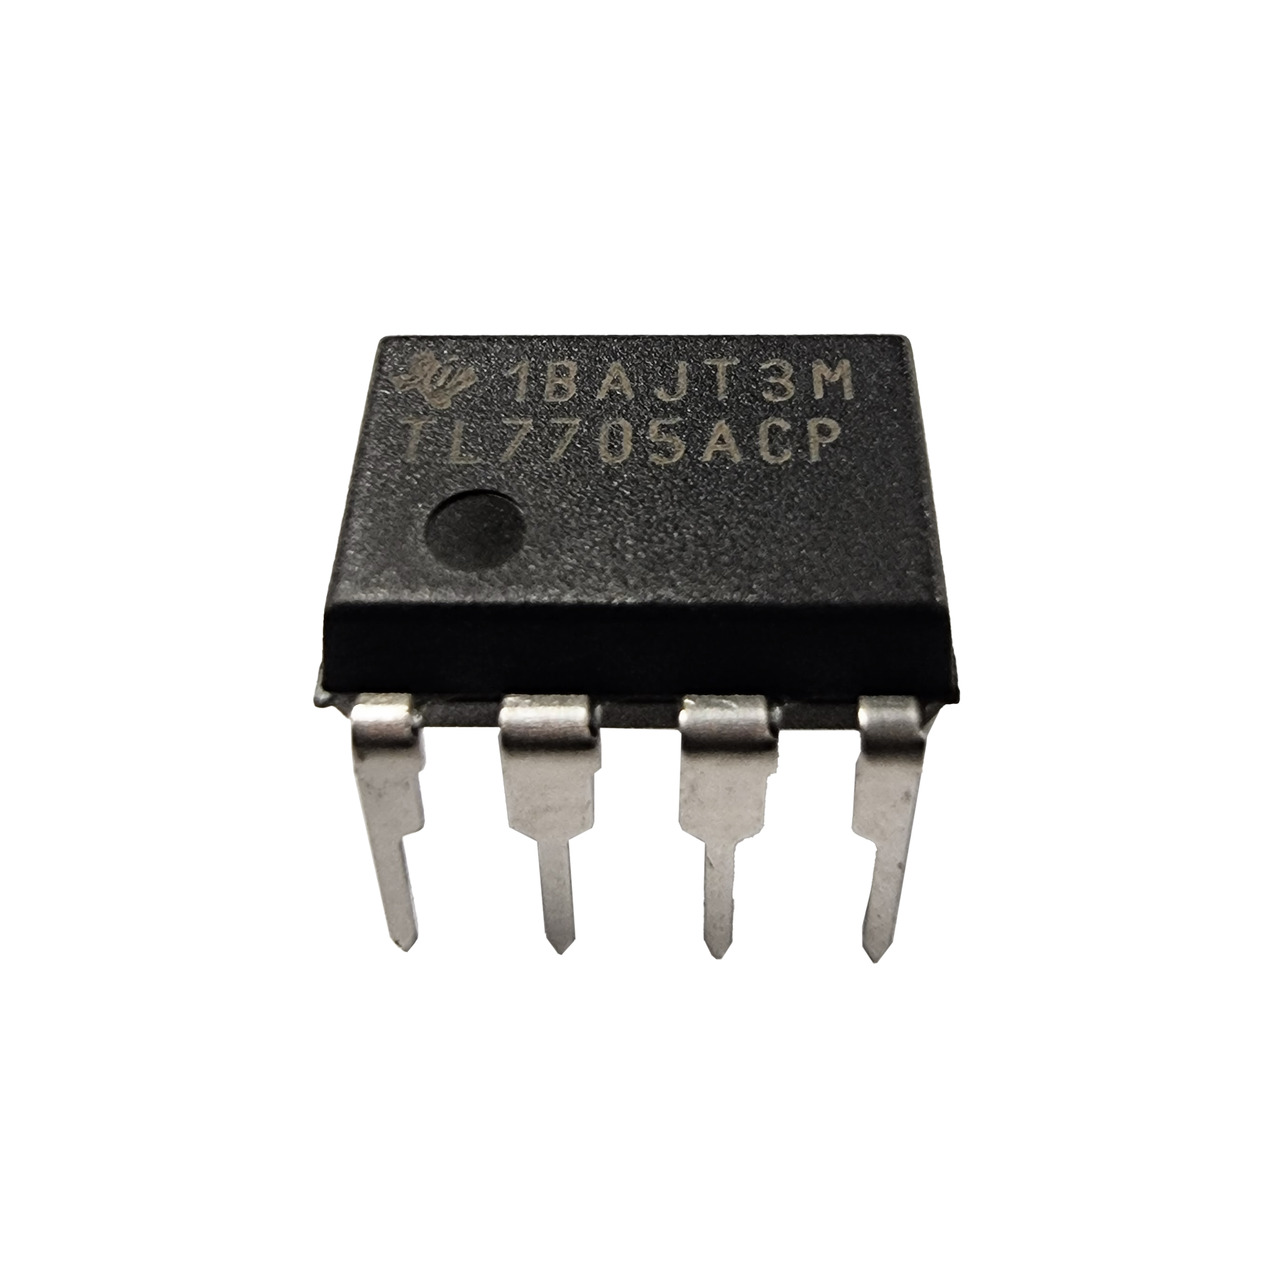 ON Semiconductor Unterspannungssensor MC33164P-5- 4-154-45 V- TO92